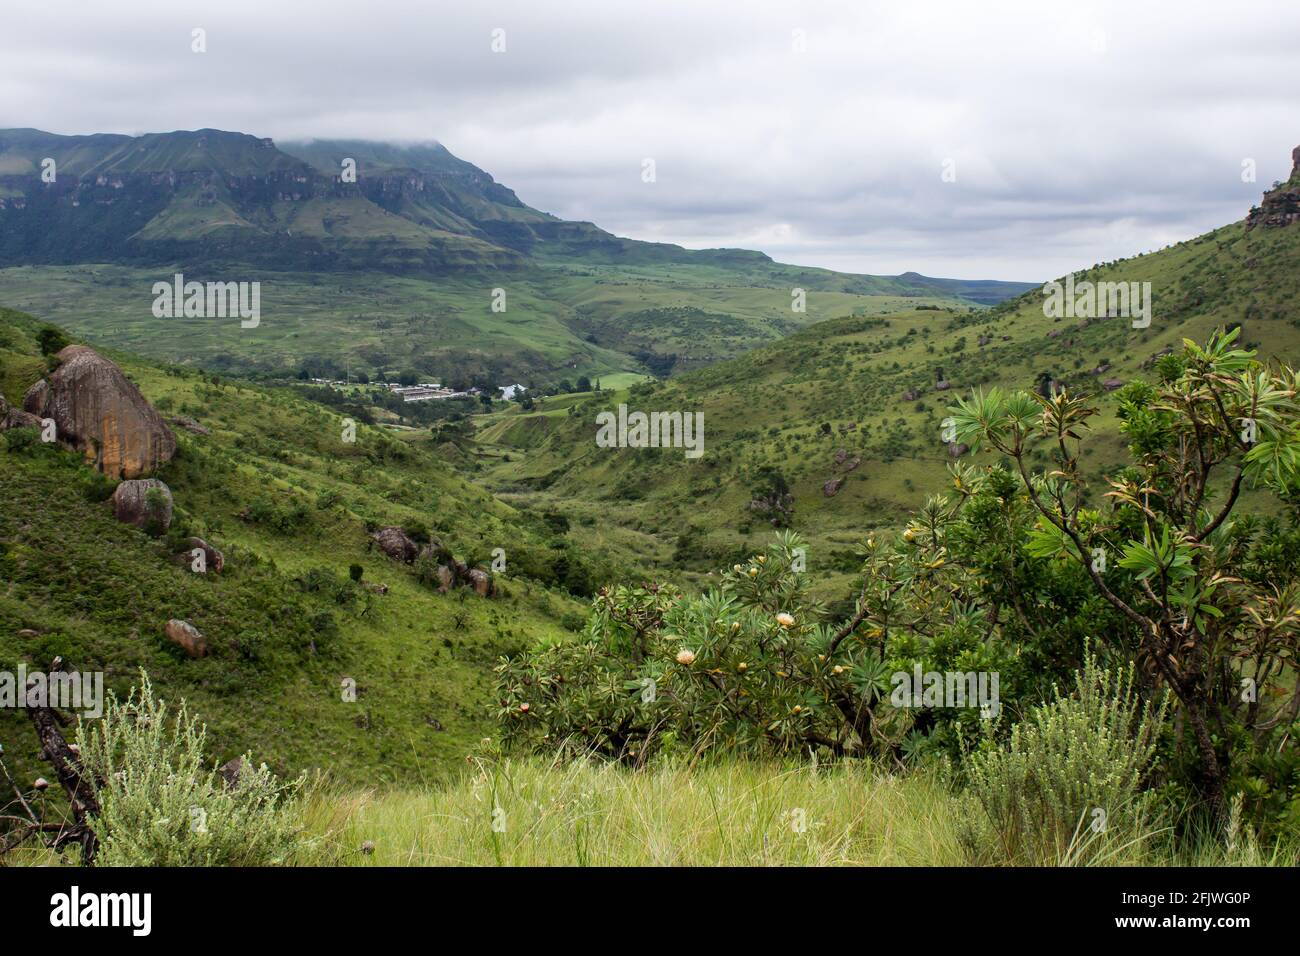 Looking down at a holiday resort, nestled in a valley in the Drakensberg Mountains of south Africa, with sugar bush proteas in the foreground Stock Photo